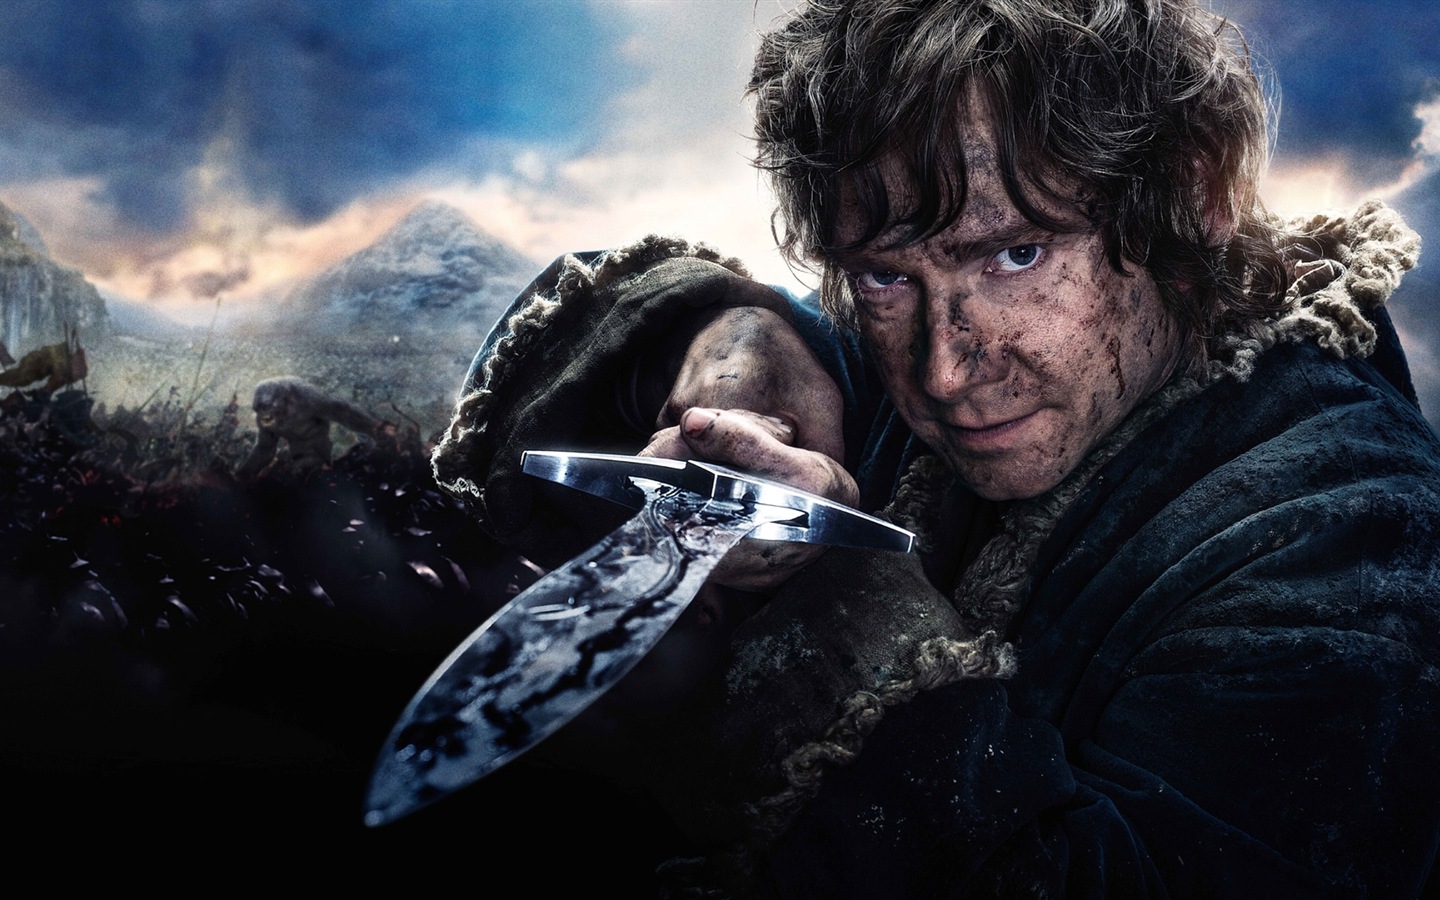 The Hobbit: The Battle of the Five Armies, movie HD wallpapers #7 - 1440x900